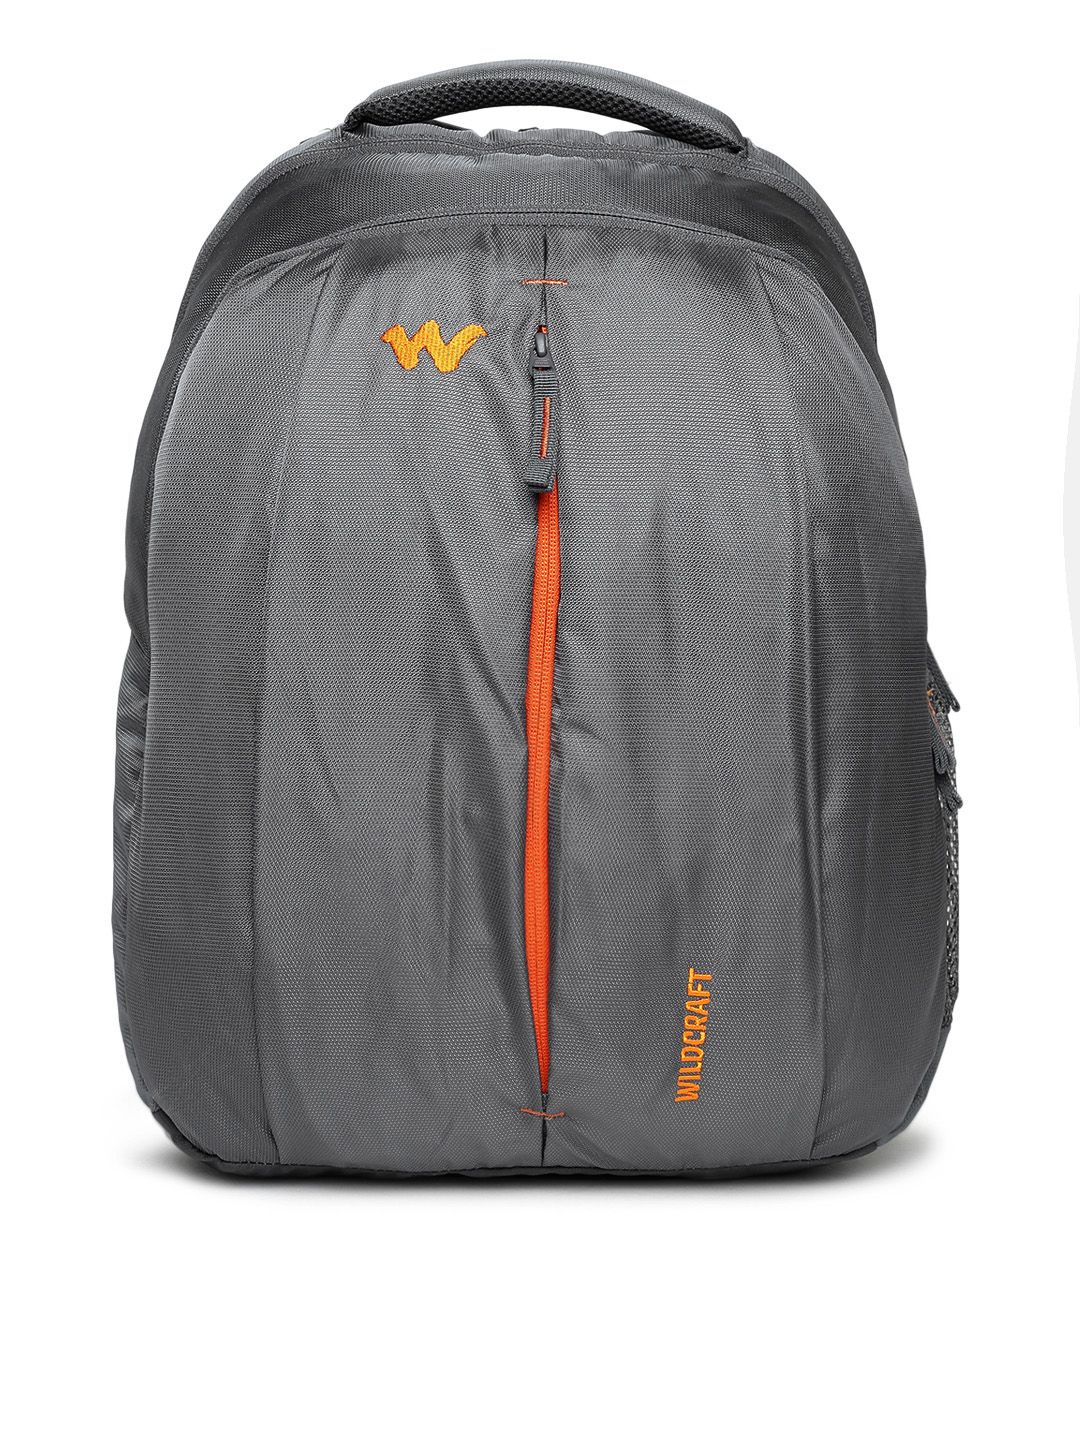 Wildcraft Unisex Grey Stanza Solid Backpack Price in India